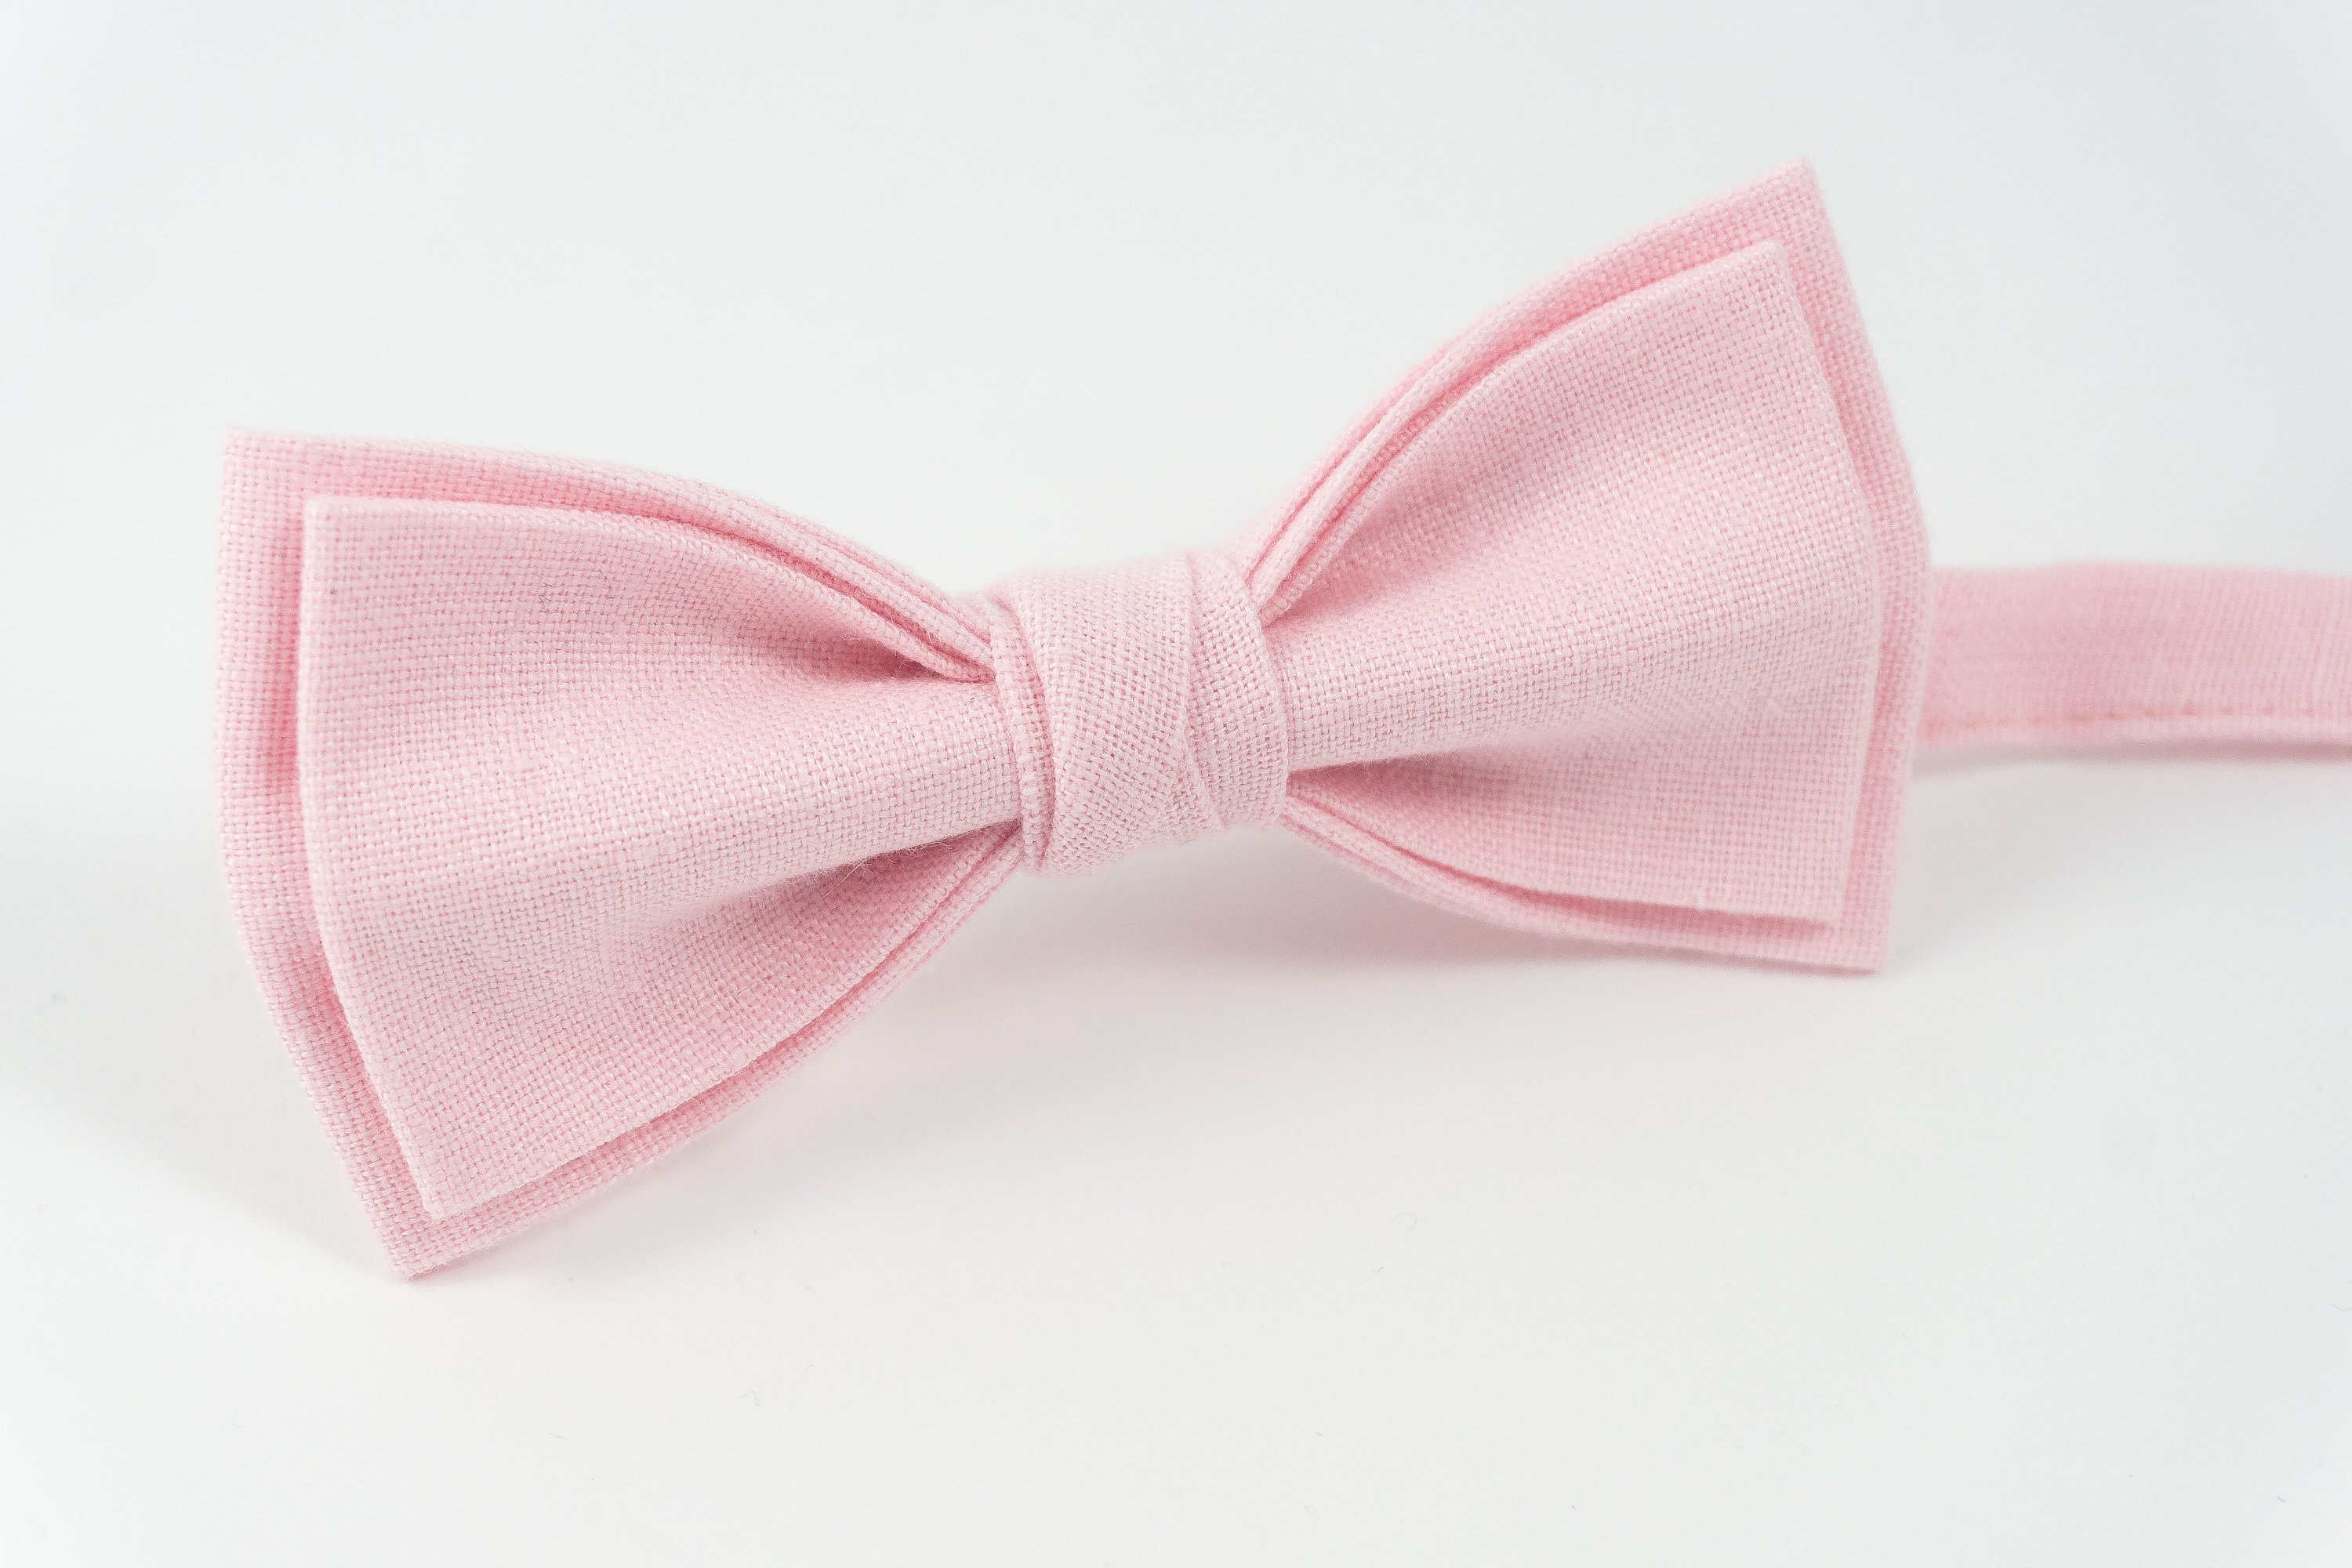 Pink color pre-tied linen bow ties for men and boys wedding | Etsy